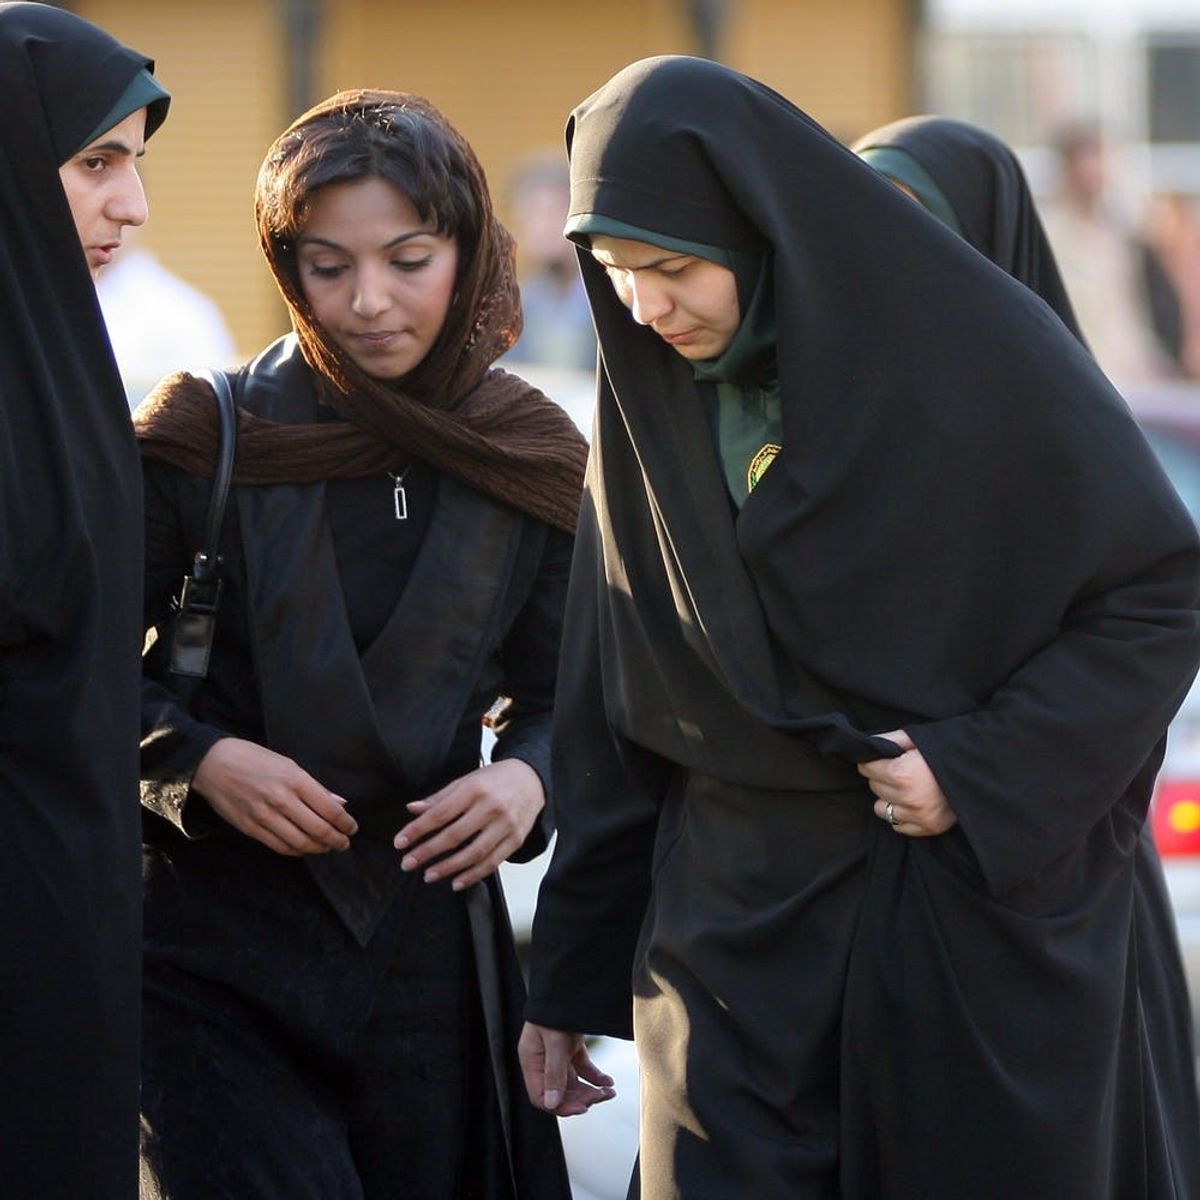 Iran Announces It Will Slightly Relax Its Strict Dress Code for Women